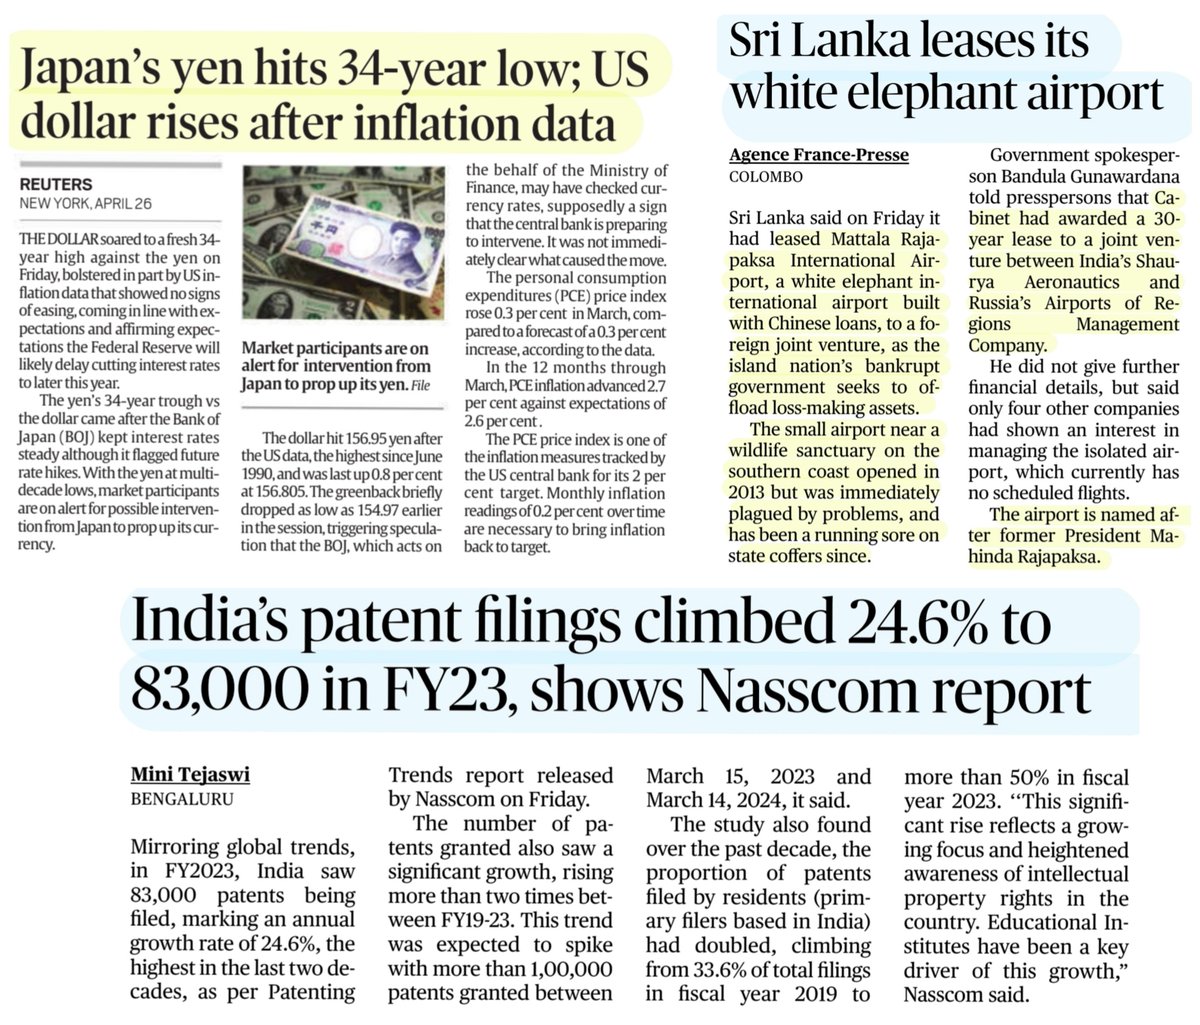 *Update
-#IsraelHamasWar 
-#UkraineRussiaWar 
-#USA #China talks
-#StudentProtests in USA📈
*NASSCOM:India's #Patent Filings📈 24.6% in FY23
*#Japan #Yen hits 34 yr low
*#SriLanka leases airport
*#Corals bred in a zoo join Europe's largest reef,Gv scientists hope

Source: IE & TH